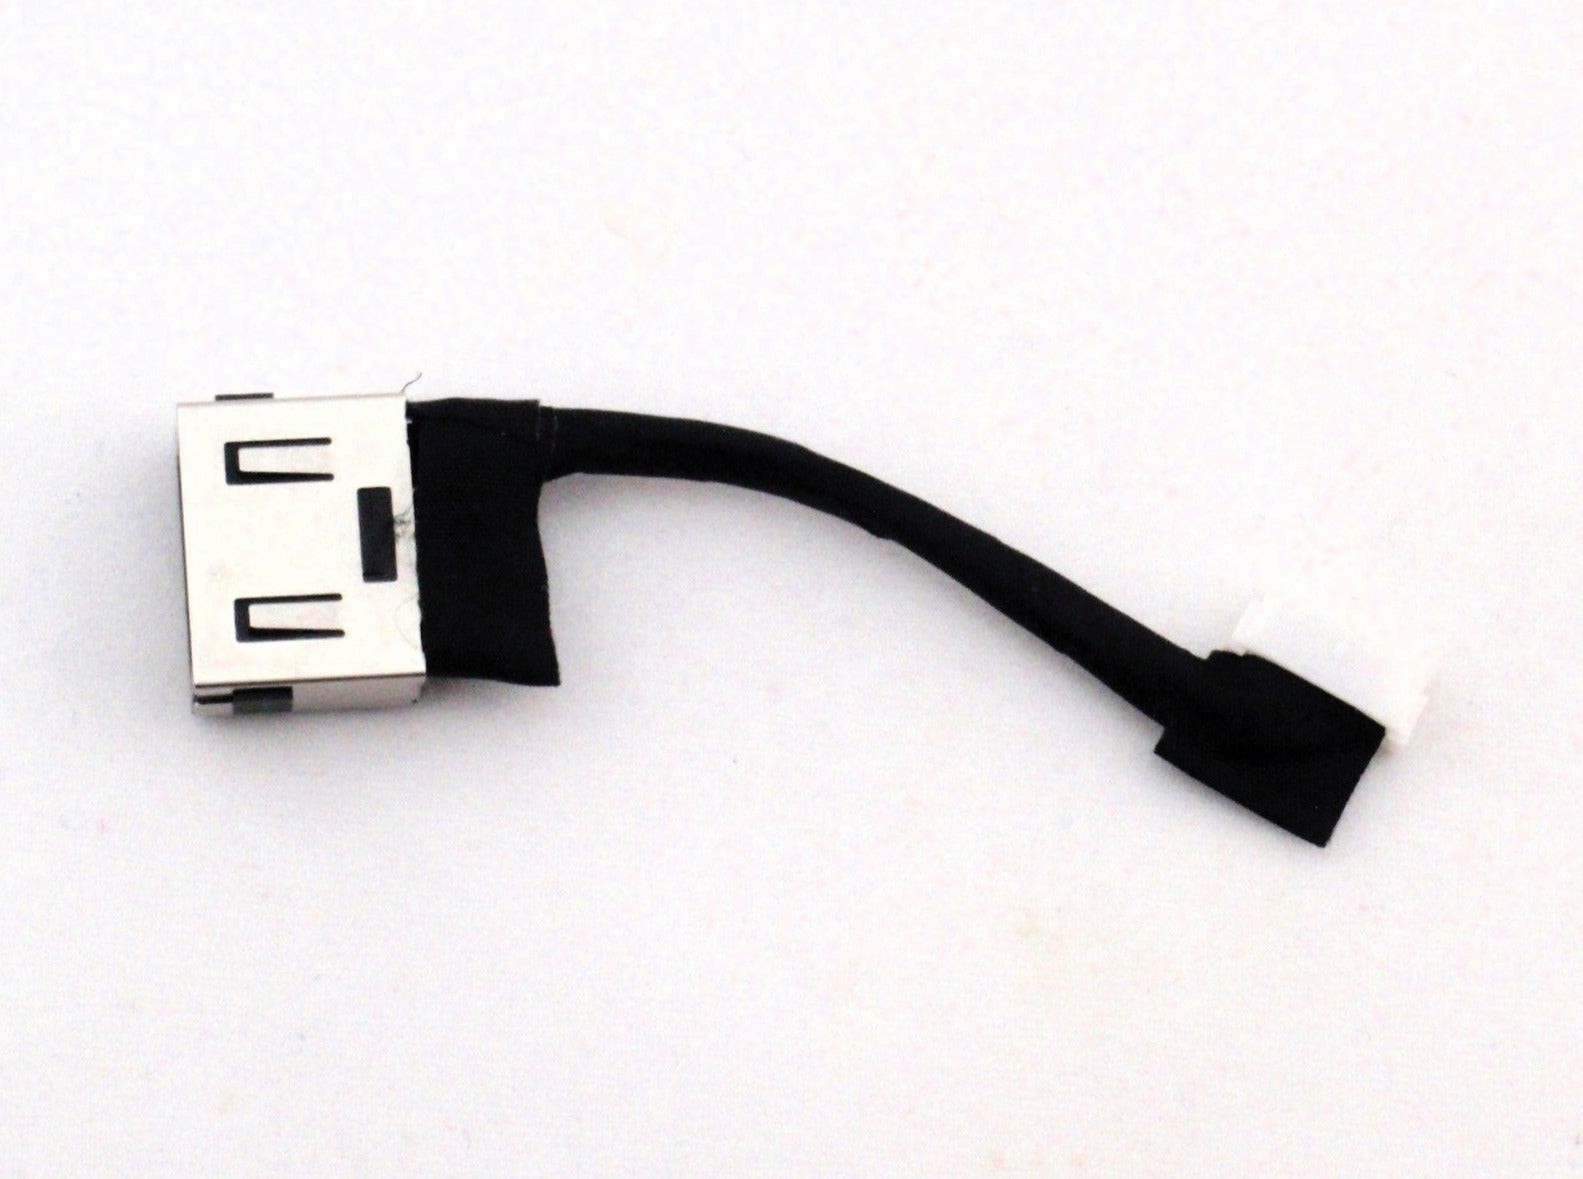 Lenovo DC In Power Jack Charging Cable ThinkPad P40 Yoga S3 14 460 20EM 20EL 20G1 20G0 20GQ 20GR 20FY 450.05109.0001 0011 00UP124